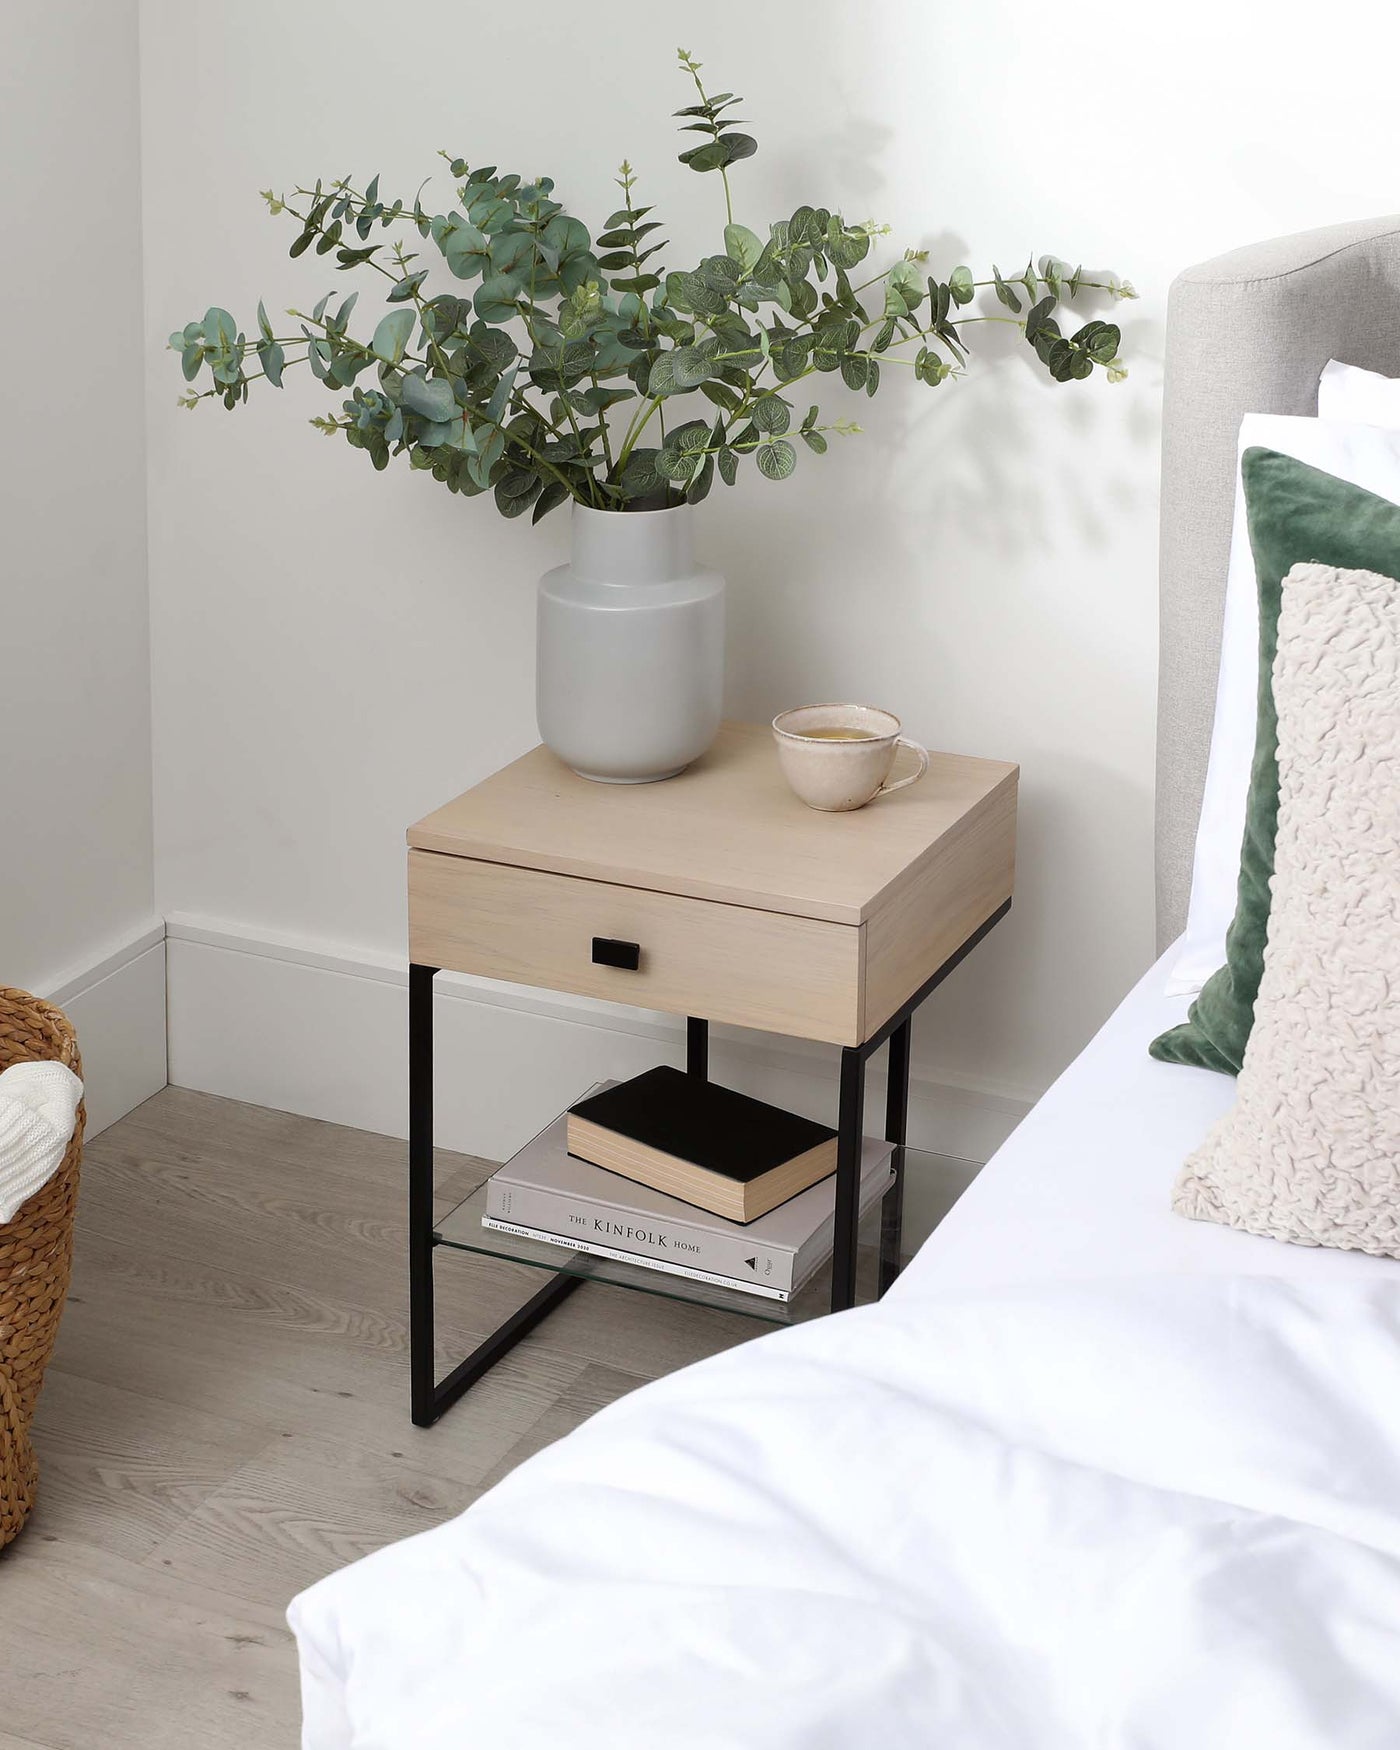 Modern minimalist bedside table with a light wood finish, featuring a single drawer with a cut-out pull handle and a lower shelf supported by a sleek black metal frame. The table is accessorized with a ceramic vase containing greenery and a small ceramic cup, accompanied by stacked books on the shelf.